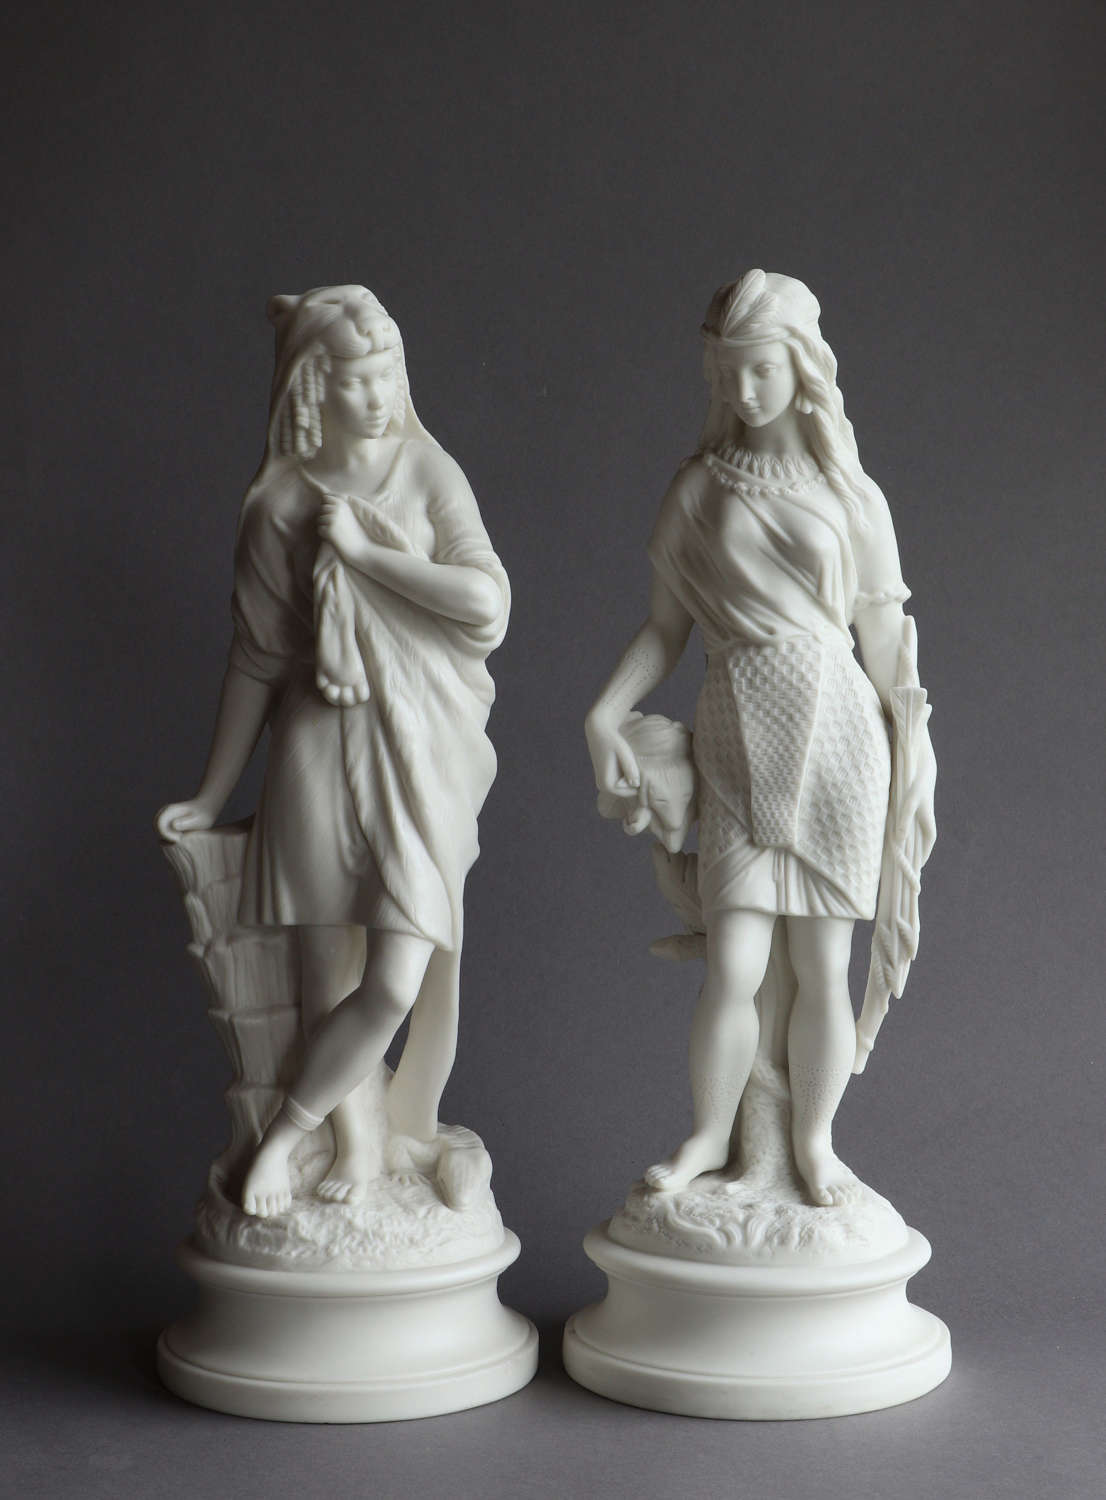 Two Parian figures by Robinson & Leadbeater of Africa & The Americas